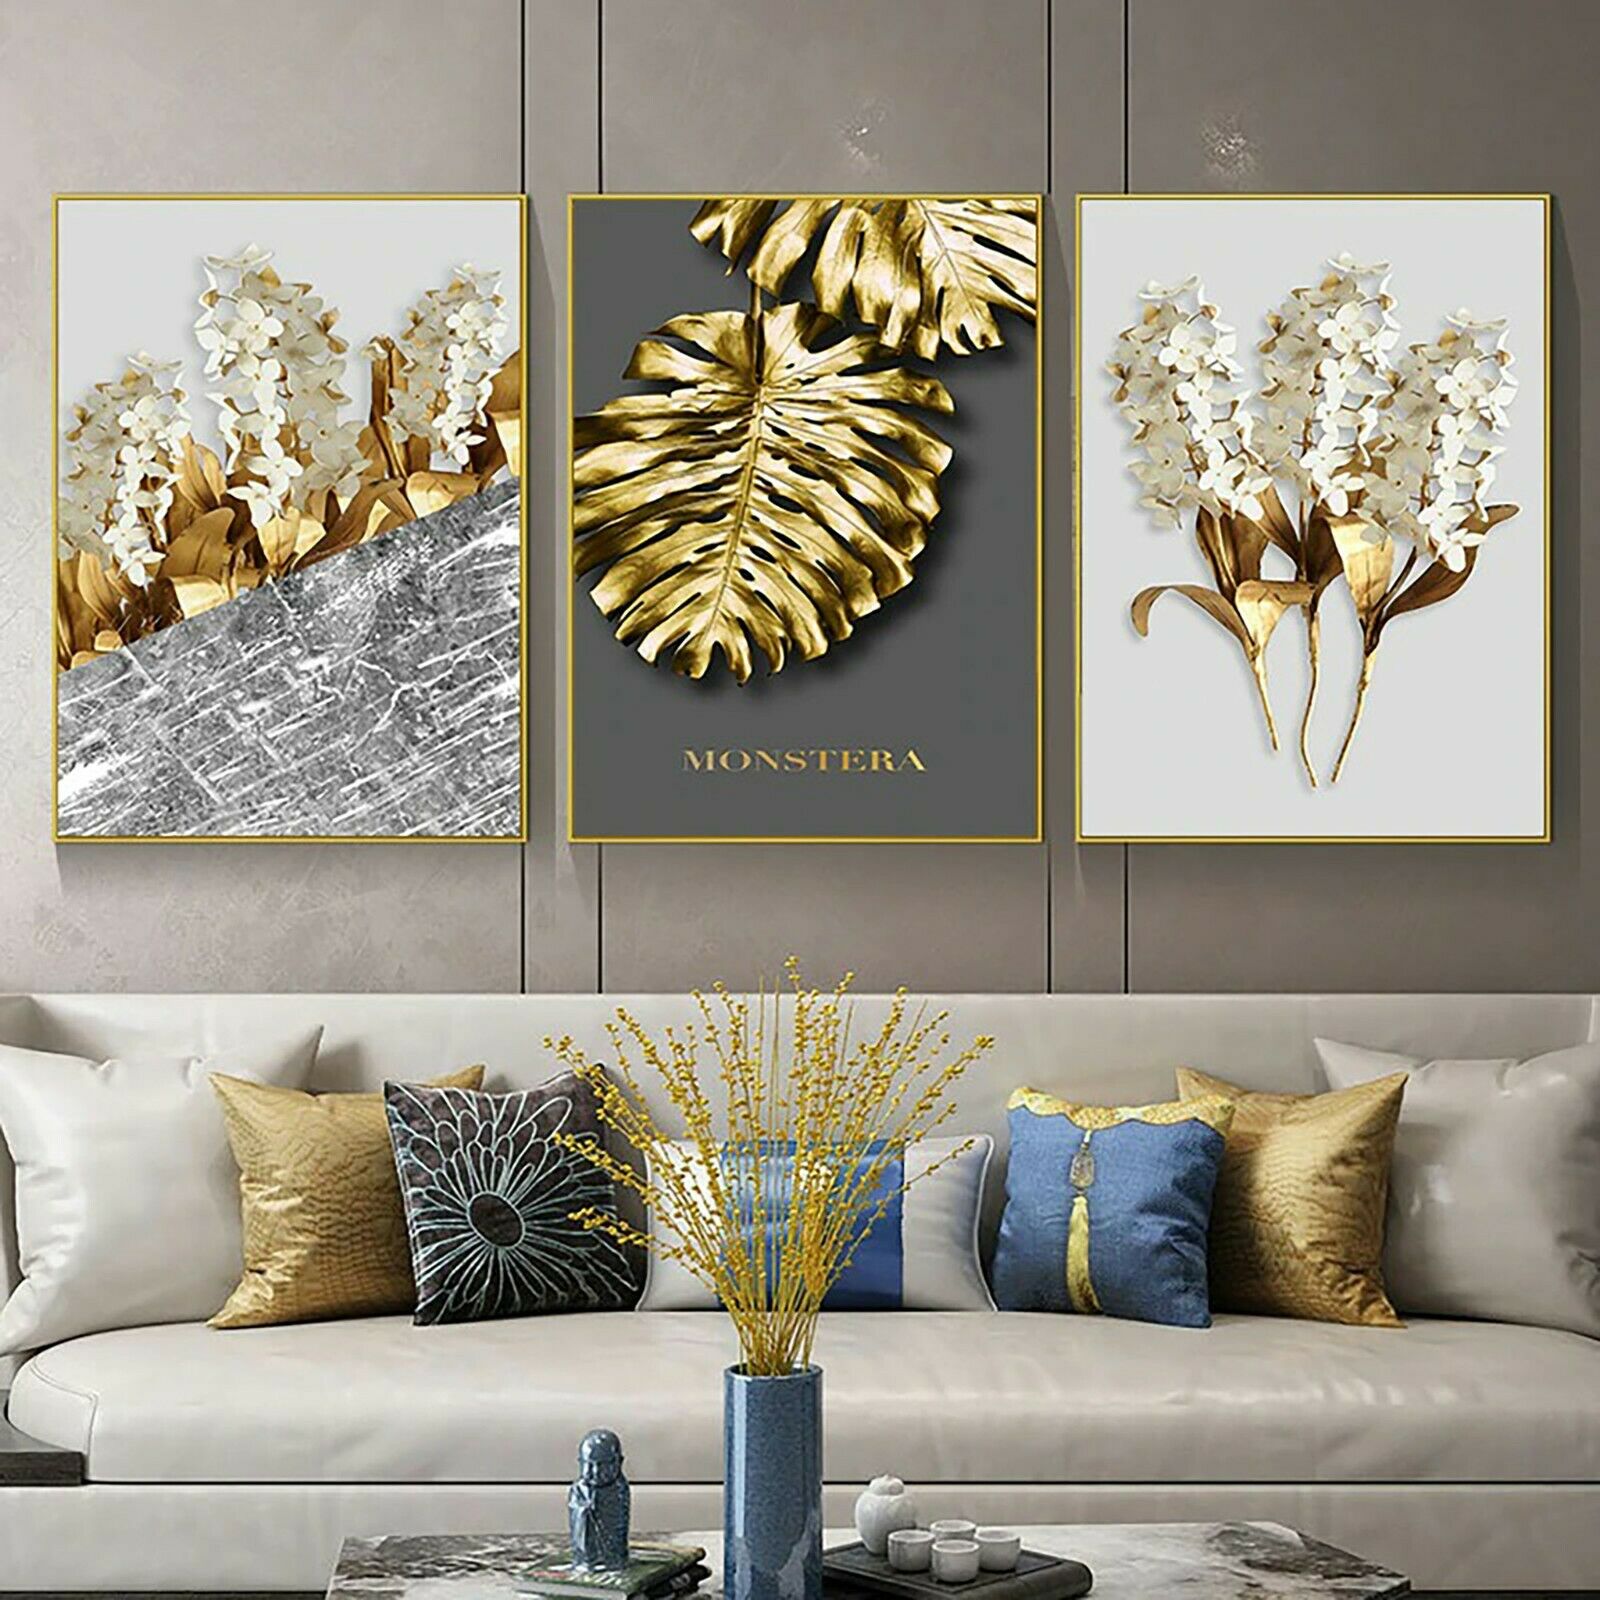 Mirrors and other wall decorations using gold color